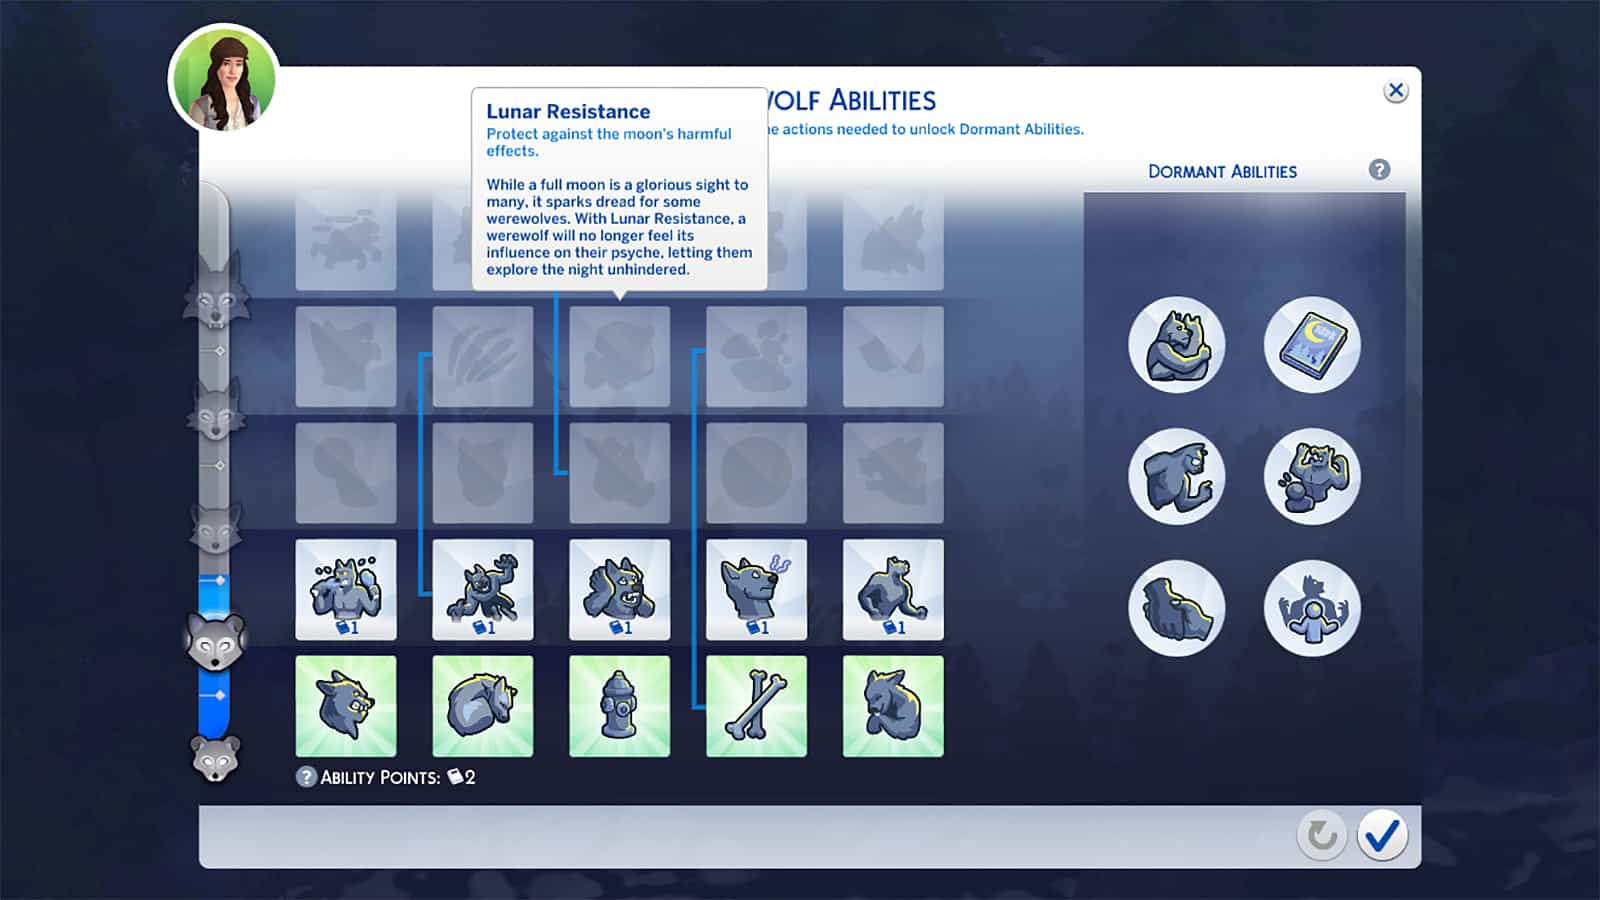 Werewolf abilities in The Sims 4